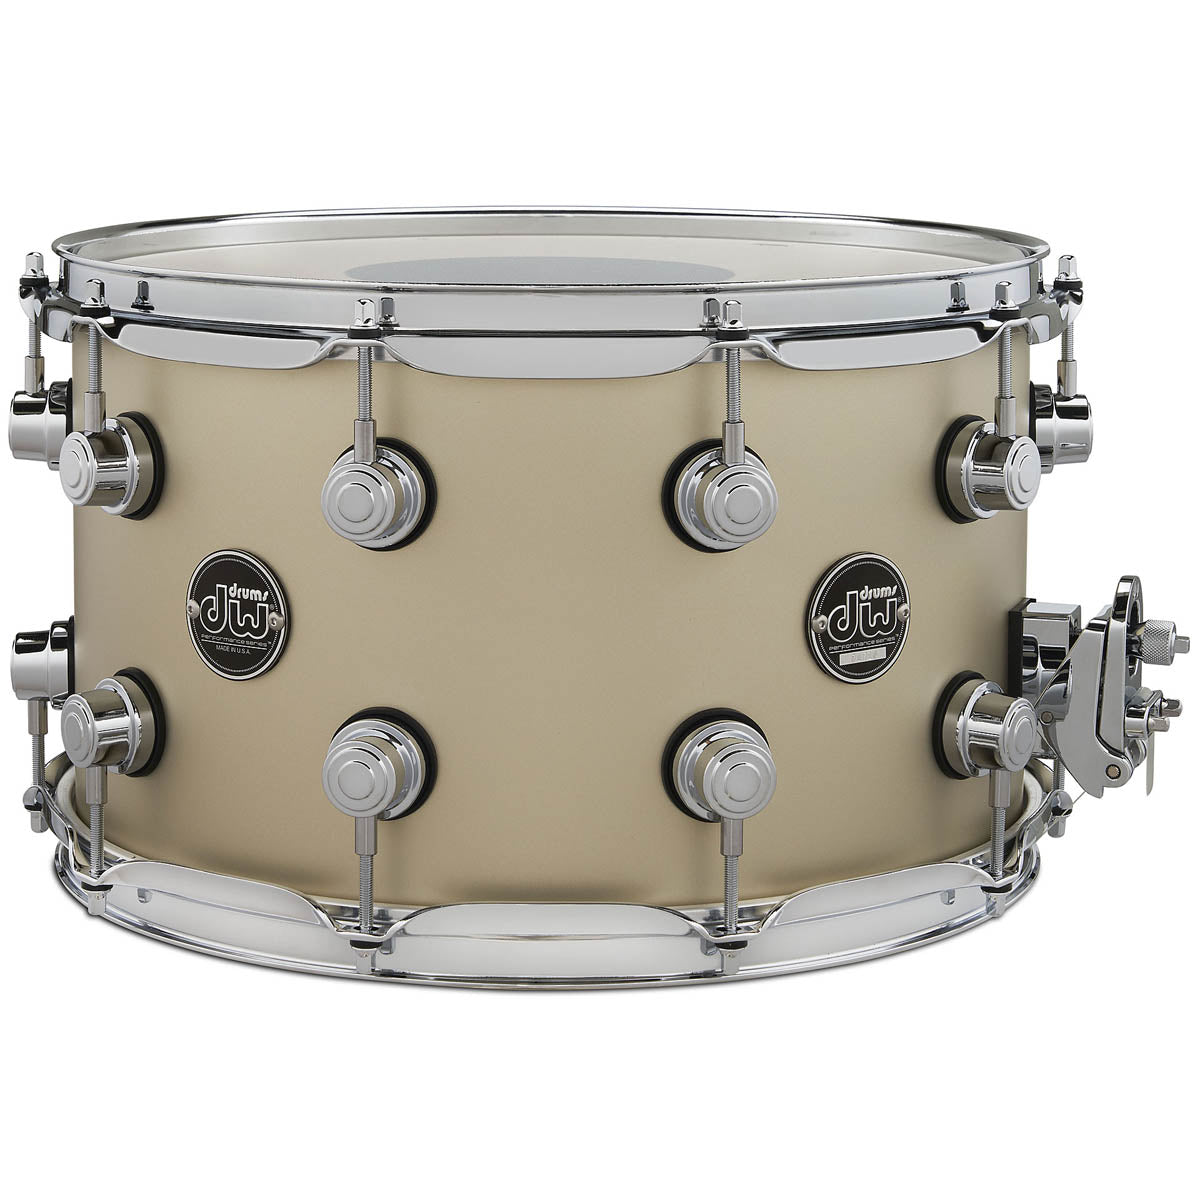 DW Performance Series 14"x8" Maple Snare Drum